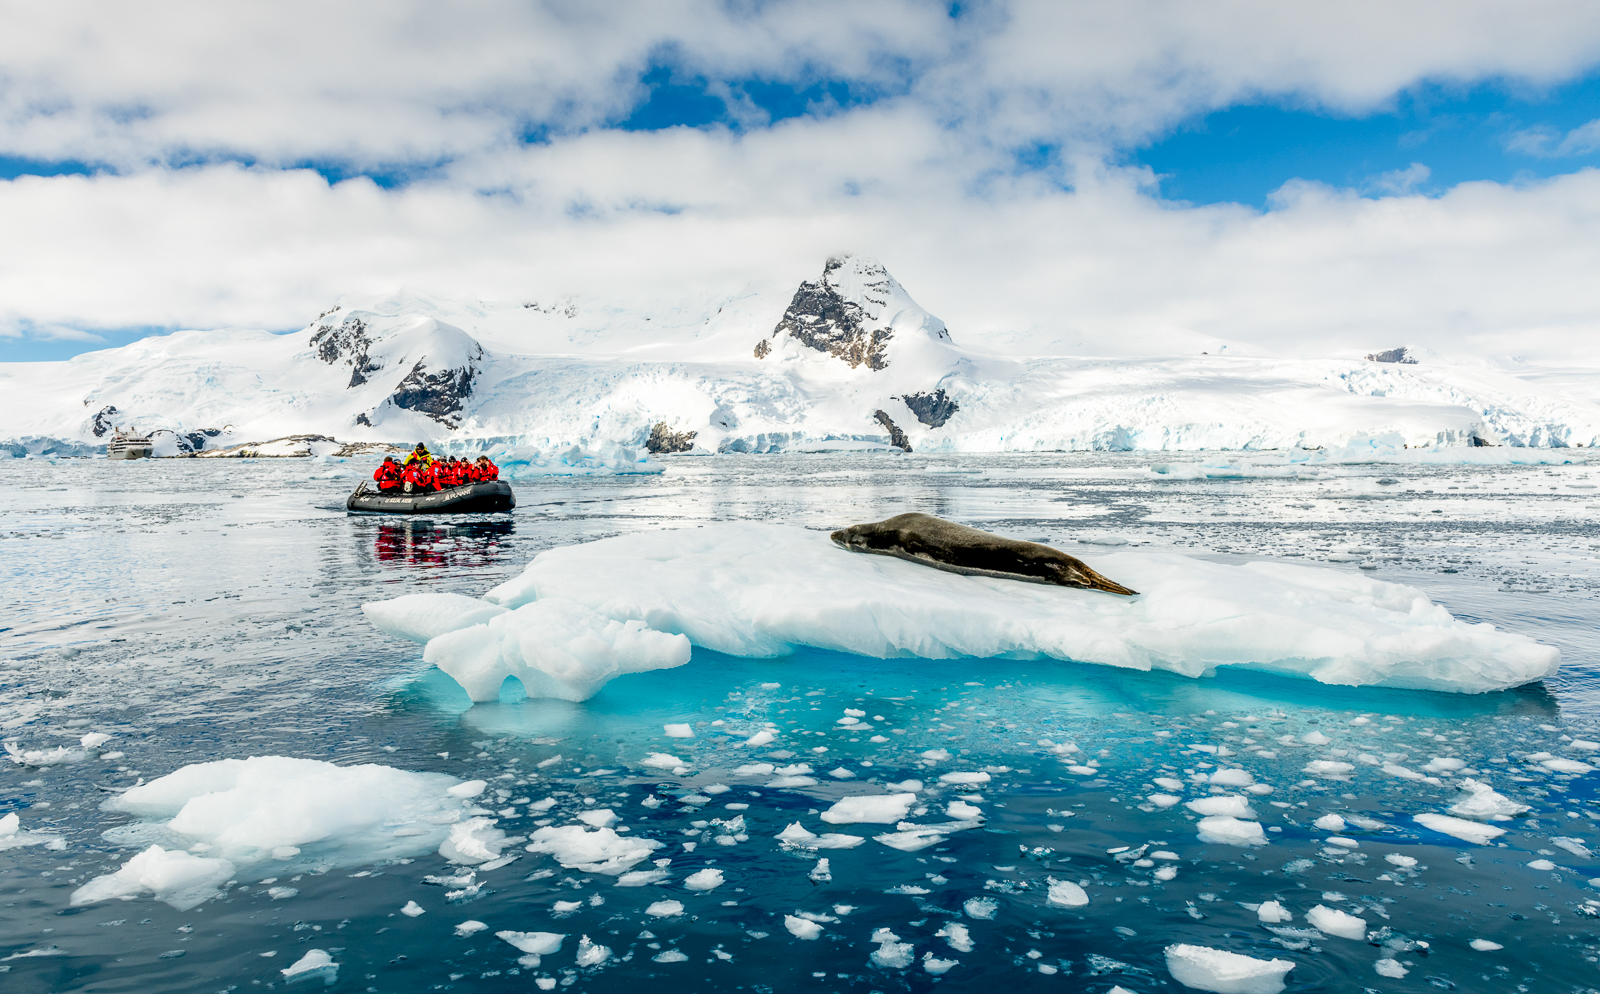 A zodiac safari from Ponant's Le Lyrial viewing a seal in Antarctica